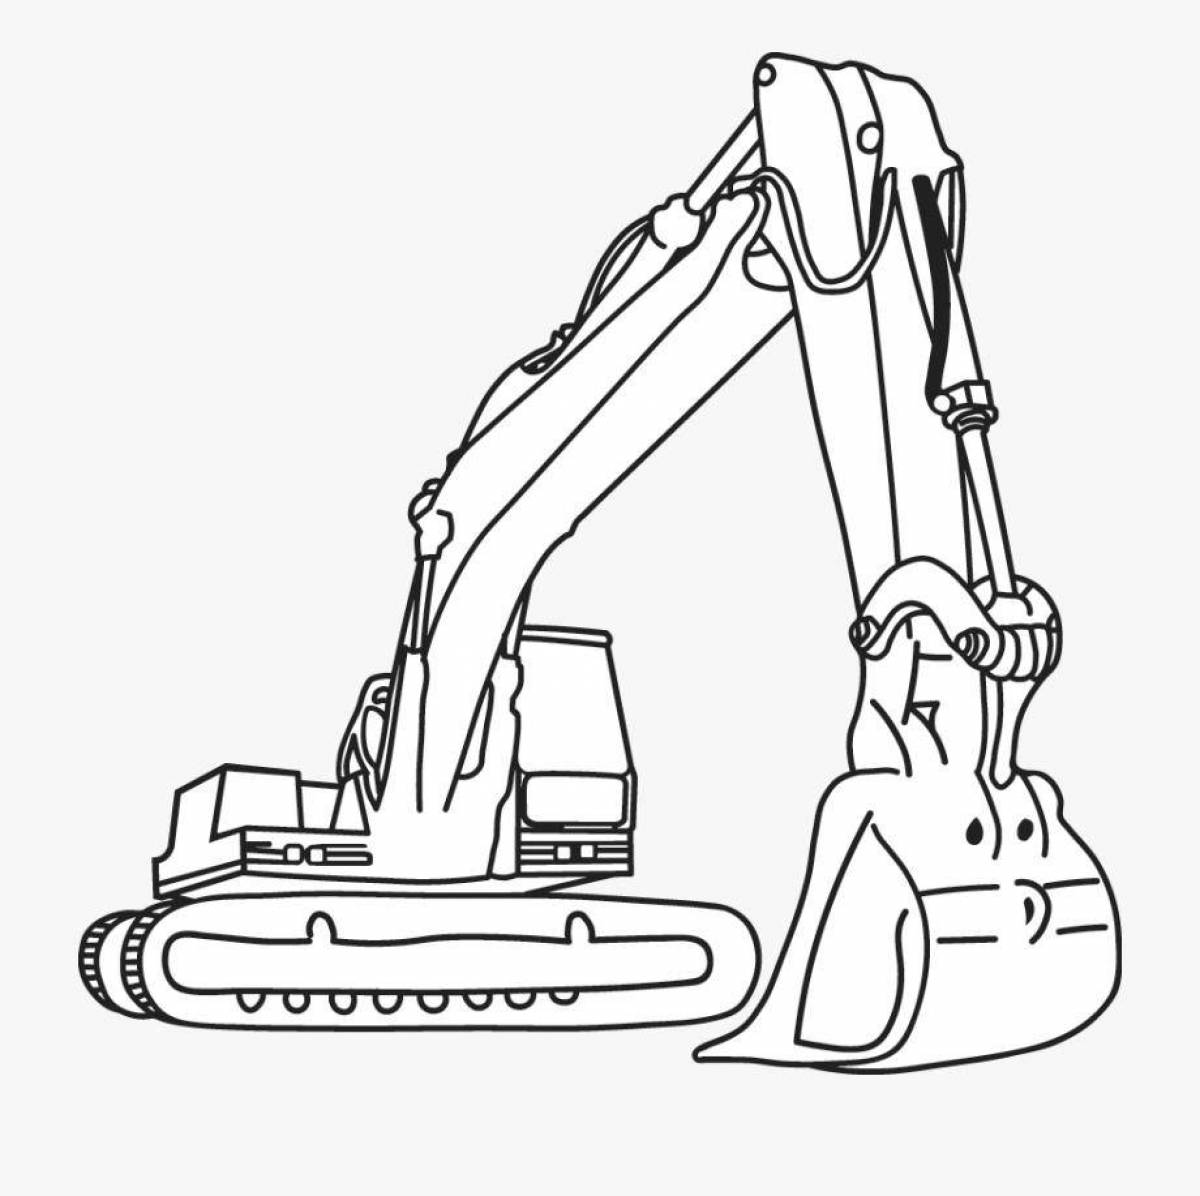 Excavator live coloring for children 5-6 years old